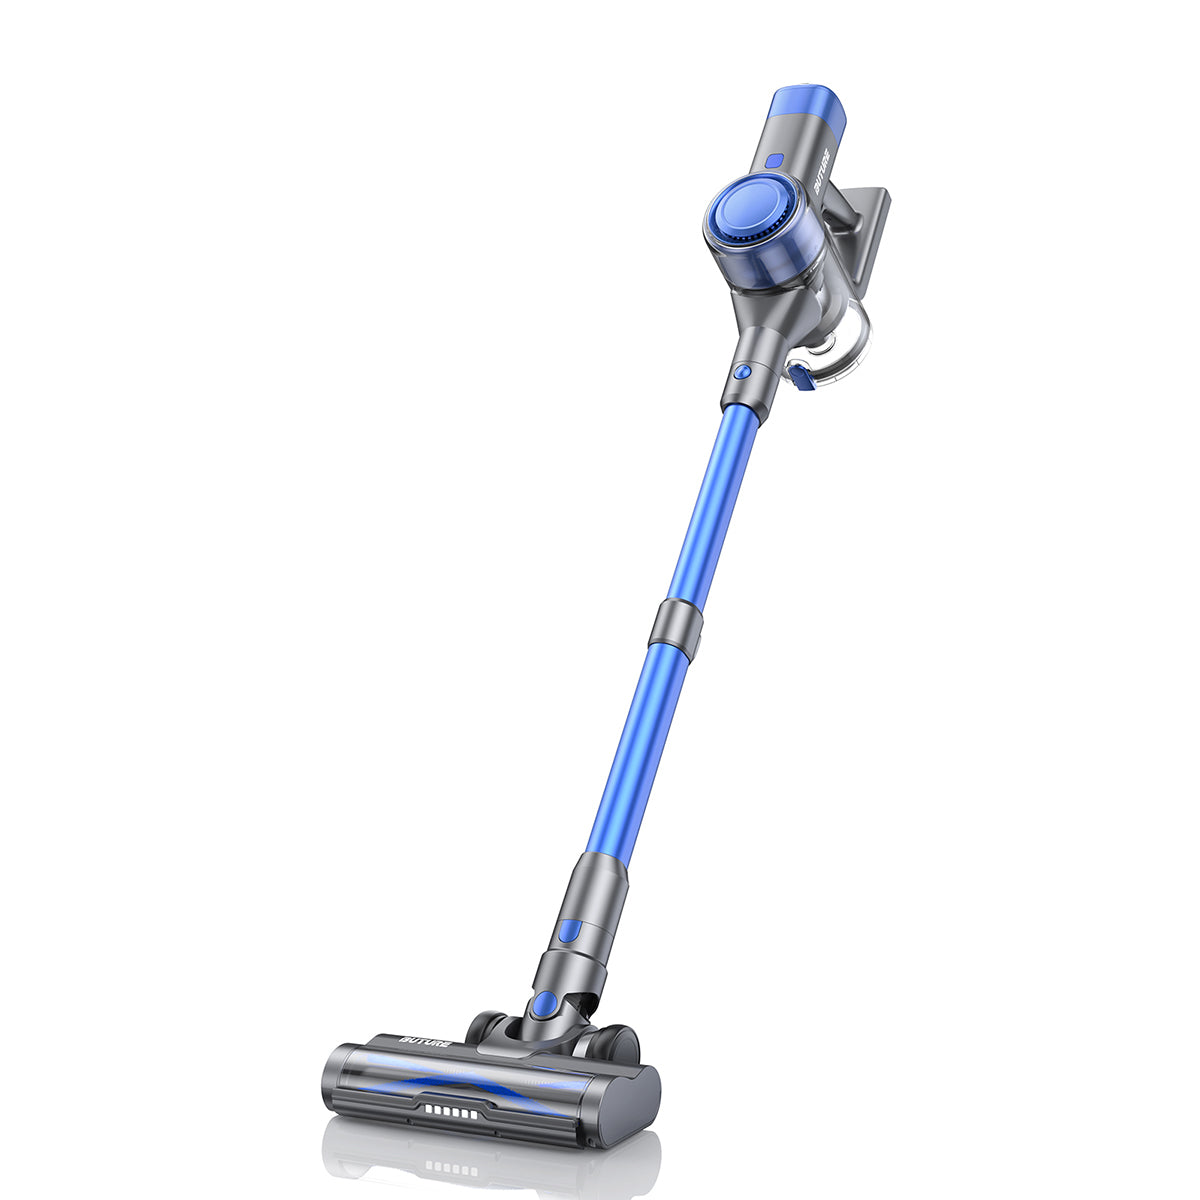 BUTURE VC70 Cordless Vacuum Cleaner User Manual